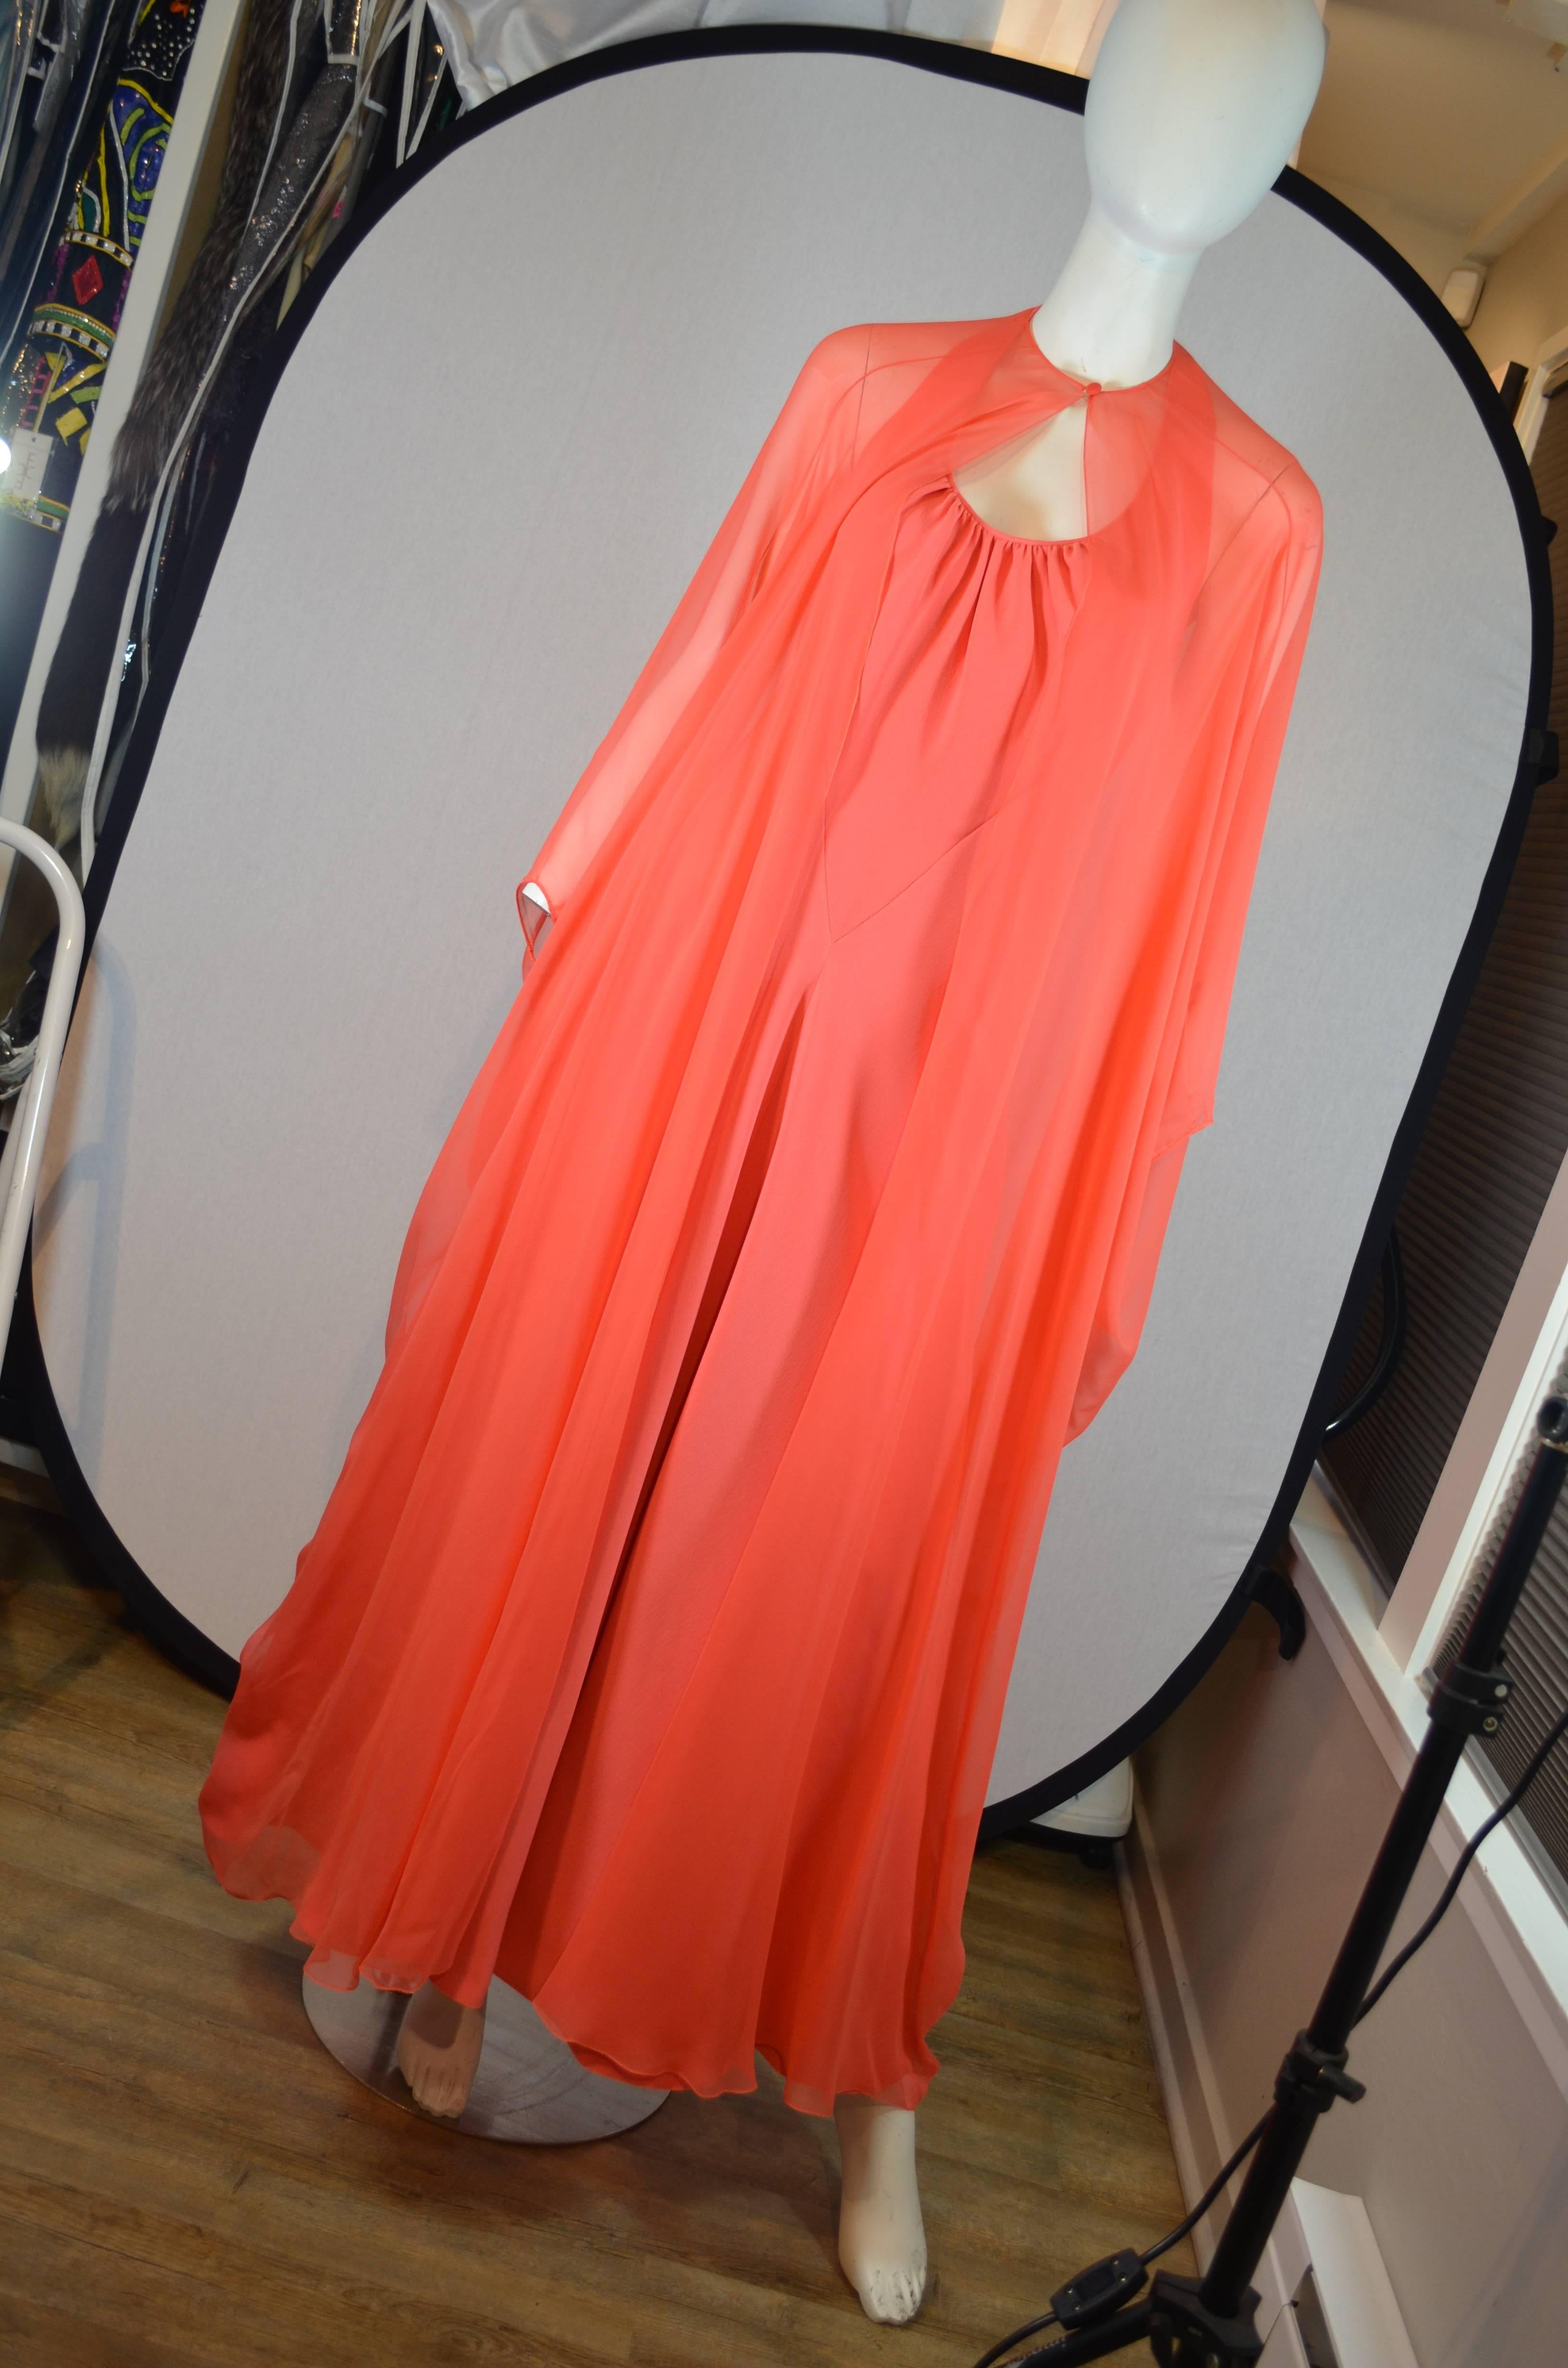 1970's Stavropoulos Coral Halter Gown With Silk Chiffon Cape
Coral gown featuring a bias cut halter crepe gown with light gathering at chest and v shaped style lines in the front to place the fabric on the bias. Sheer coral silk chiffon cape